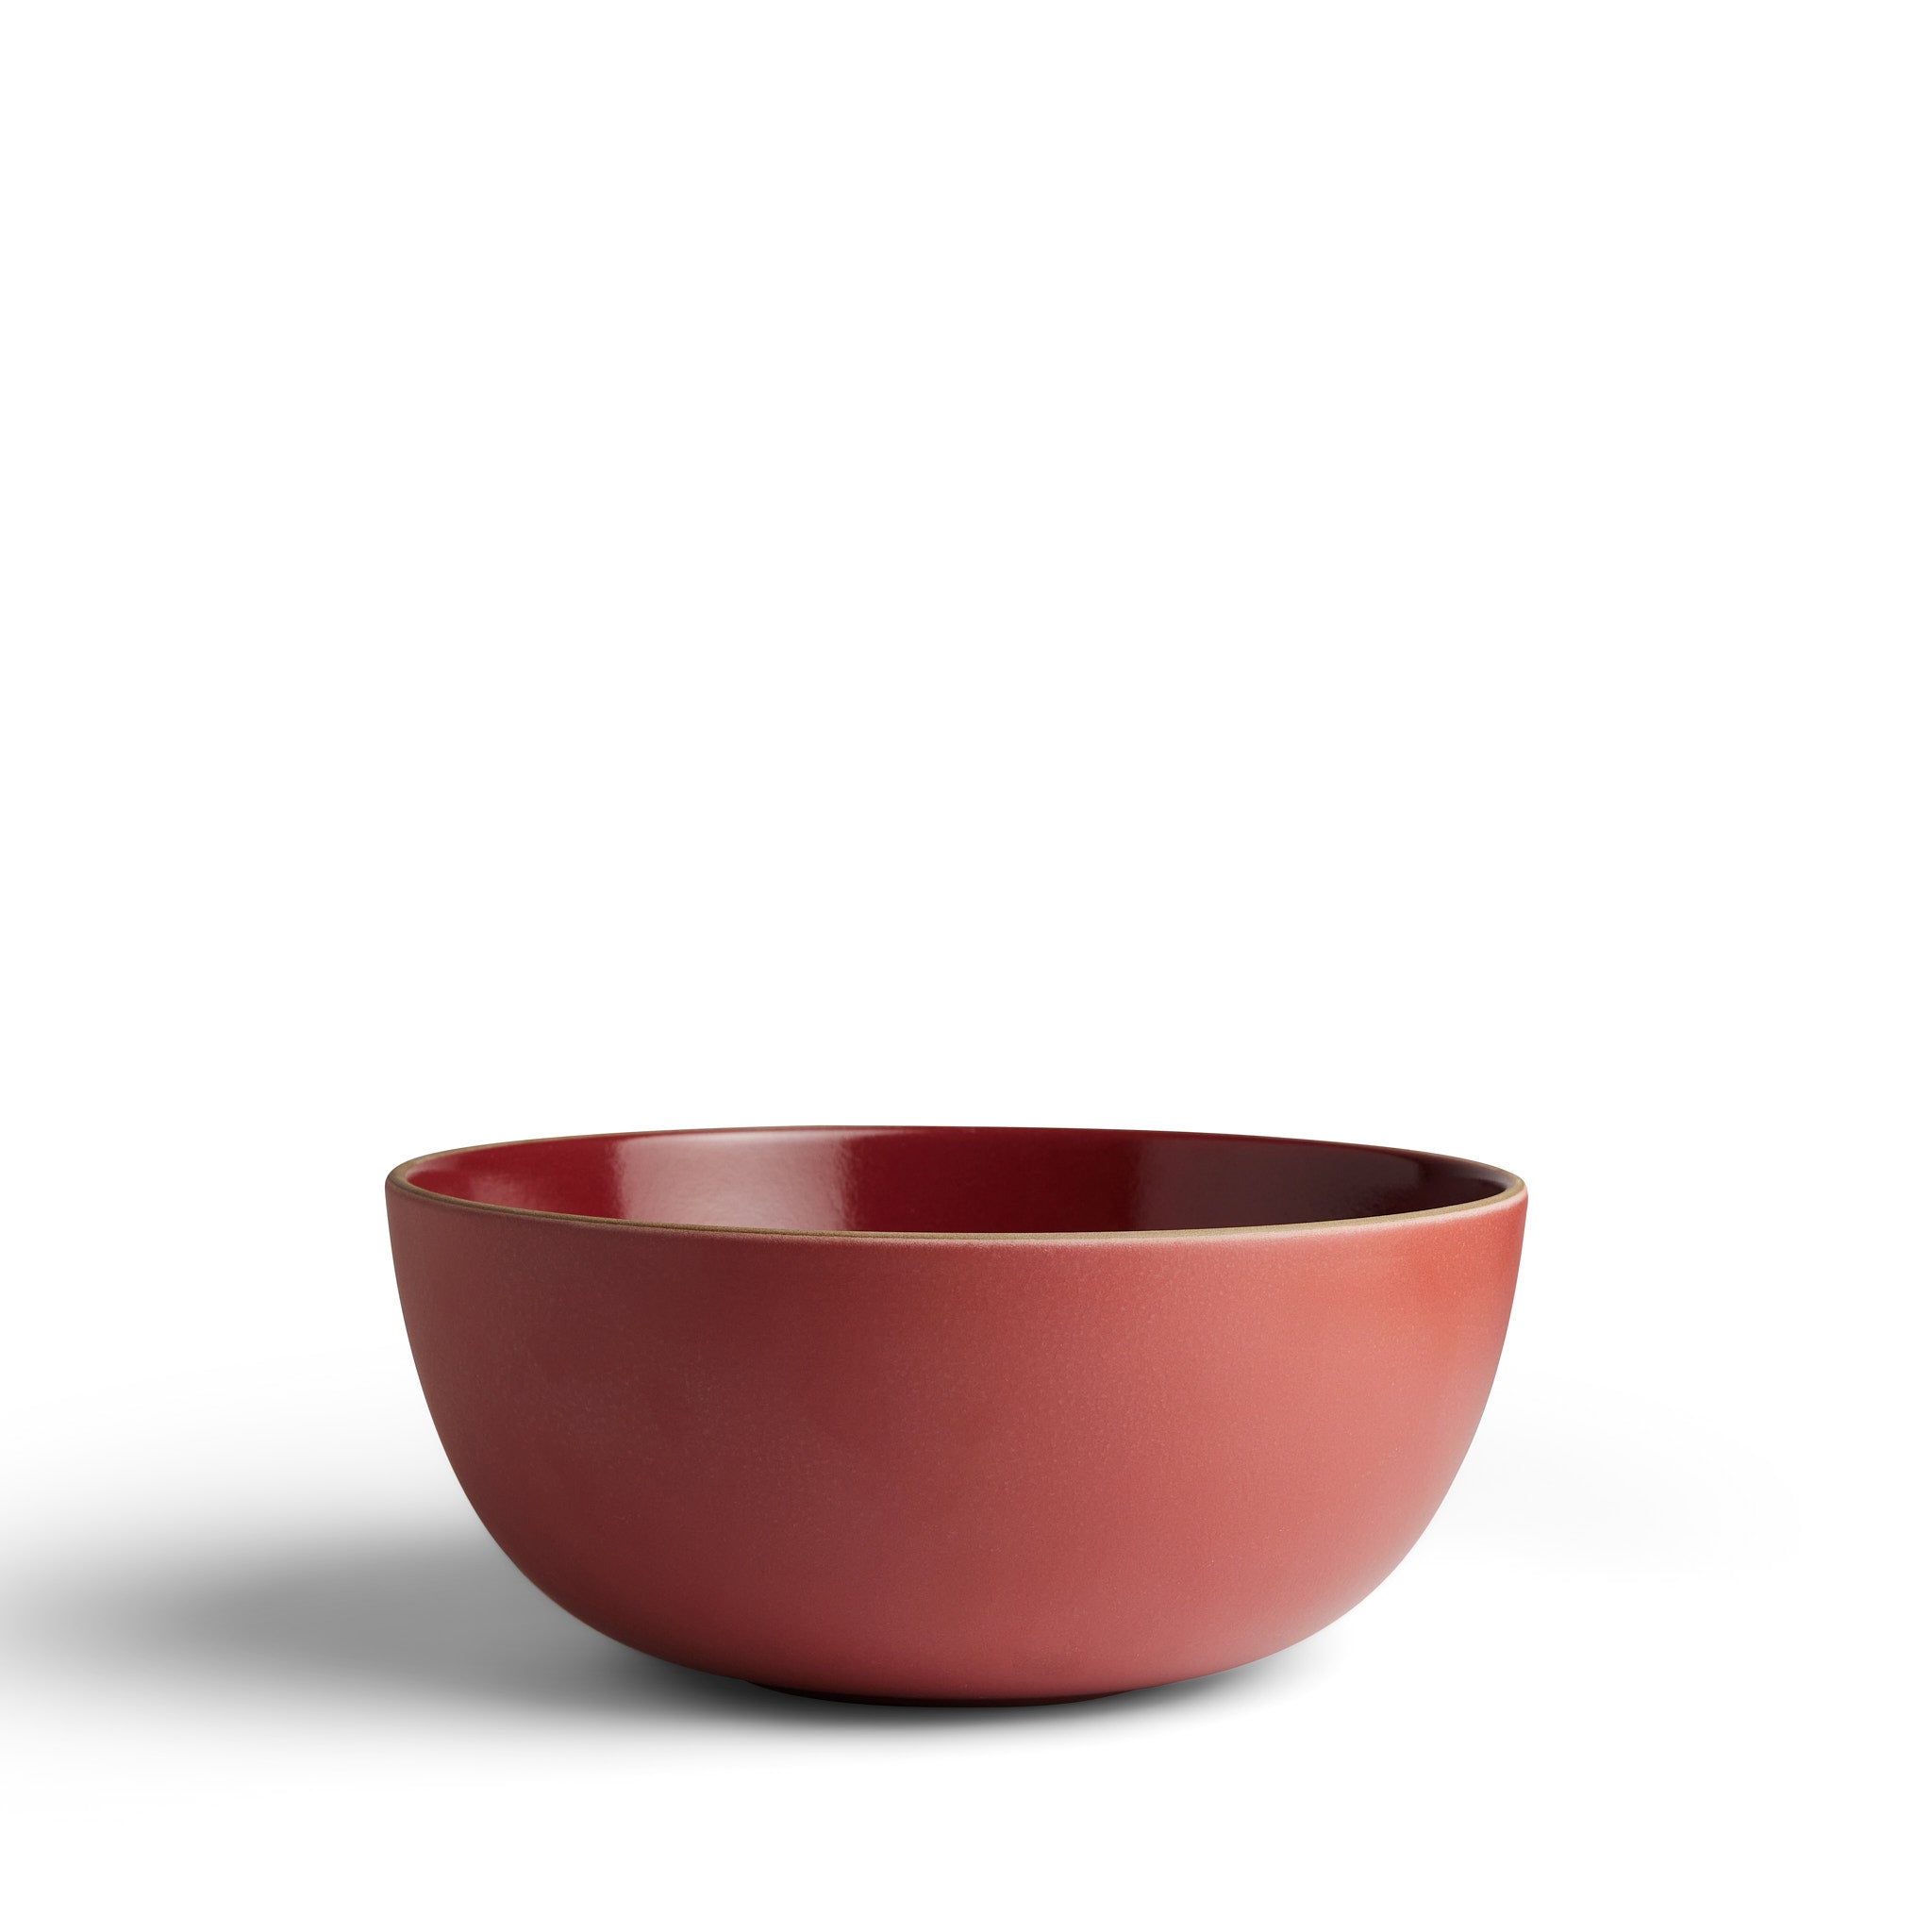 Large Serving Bowl in Red Plum/Chile Zoom Image 1